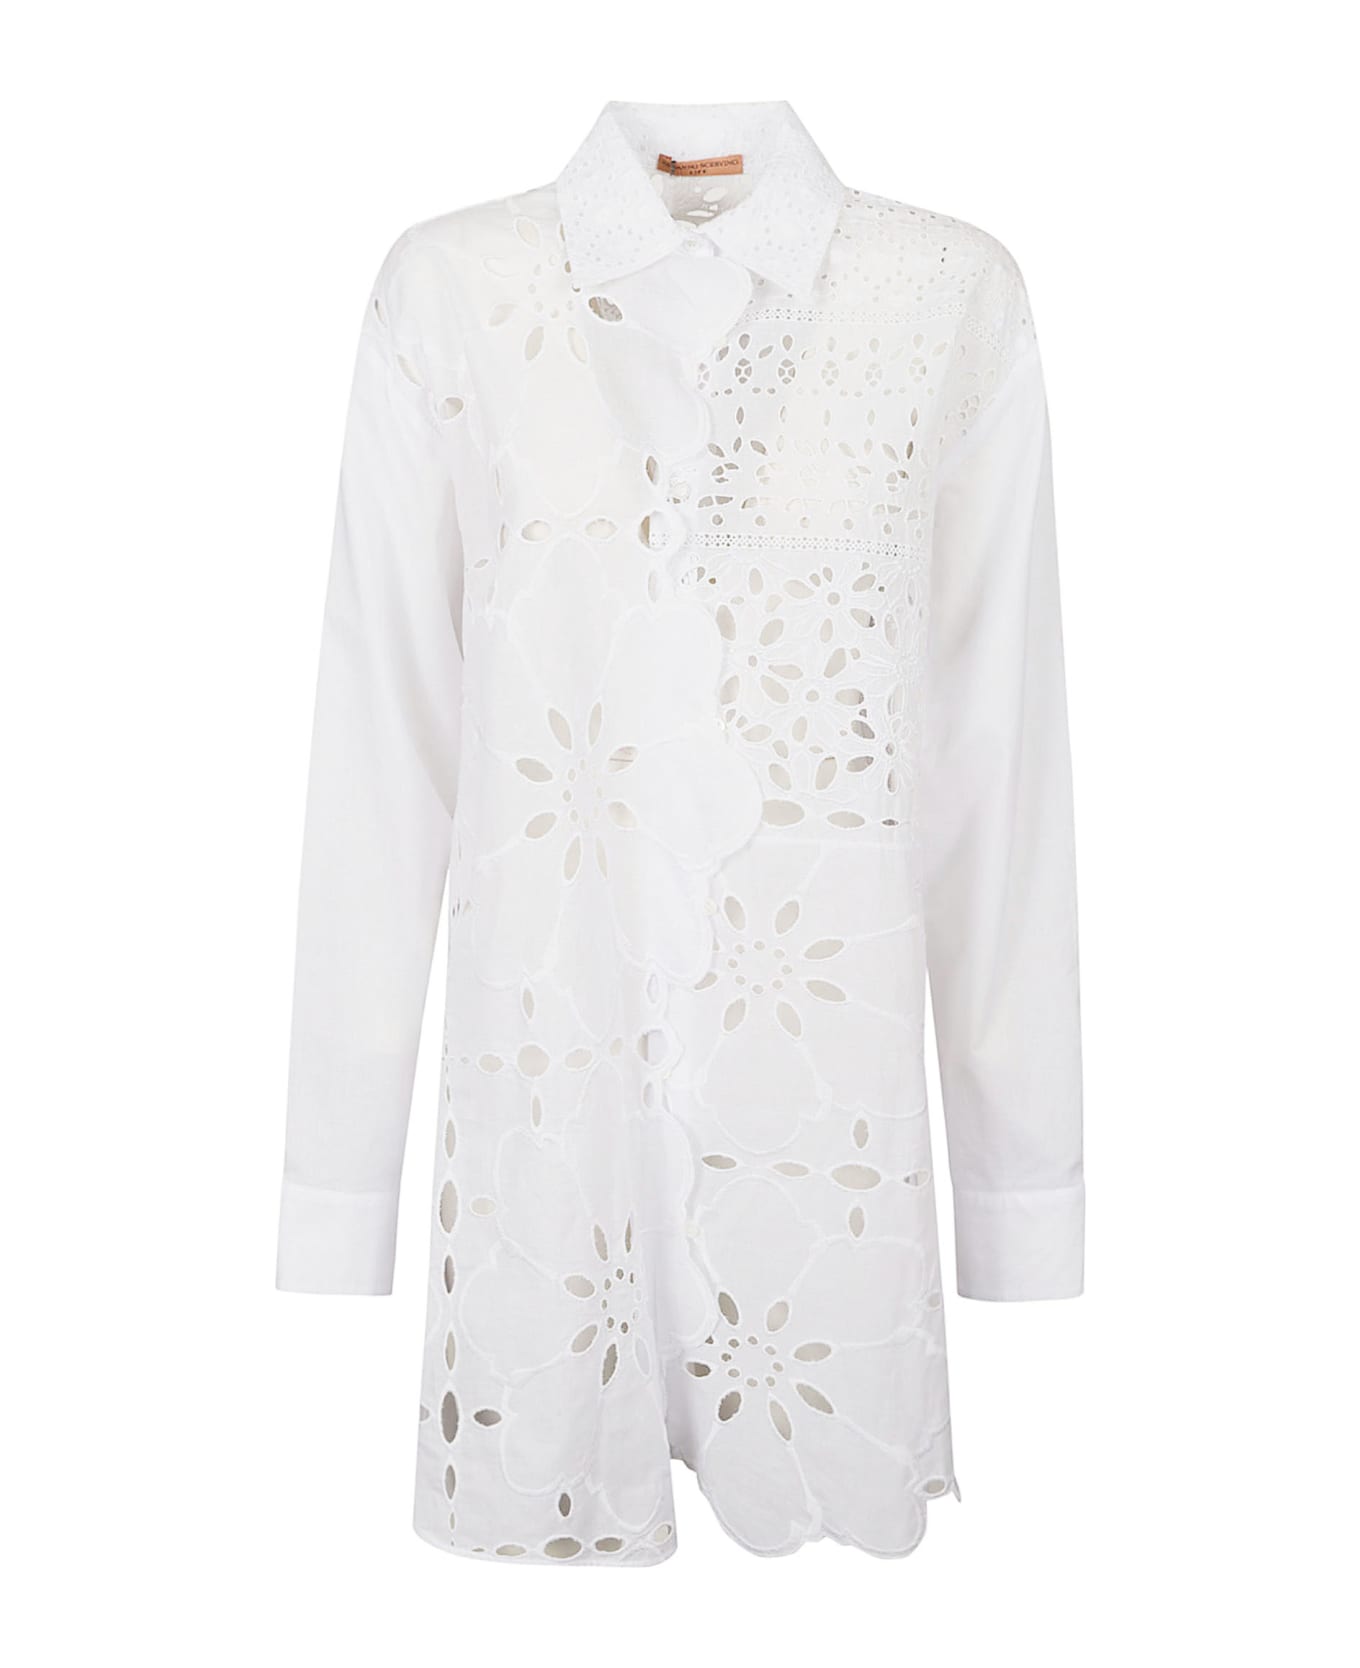 Ermanno Scervino Floral Perforated Oversized Shirt - Bright White